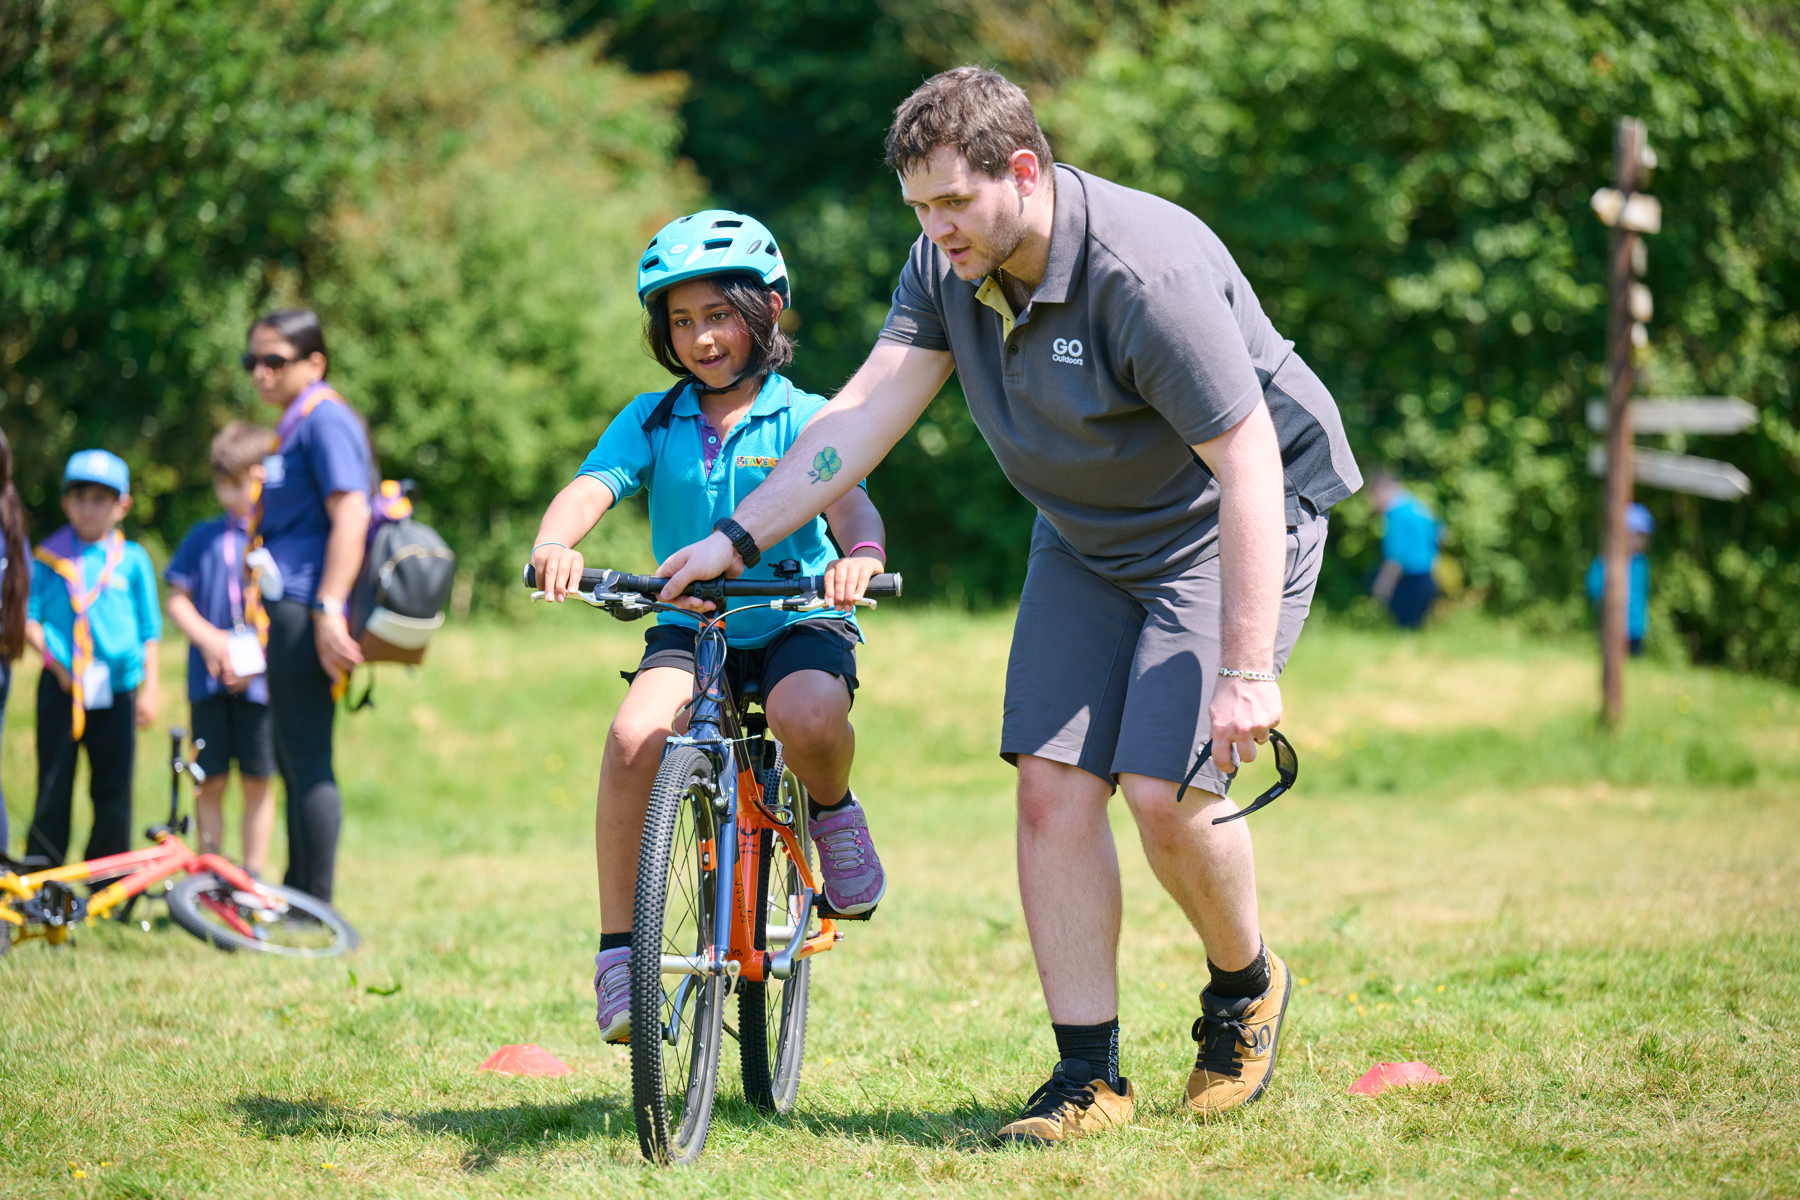 A Beaver is wearing a blue Beavers polo shirt and a blue helmet and is riding a bike on grass. To the right of her is a GO Outdoors volunteer holding onto her handlebars with his right hand. There are two red cones on the grass just behind them, and there are two other Scouts and a volunteer in the background to the left of them.